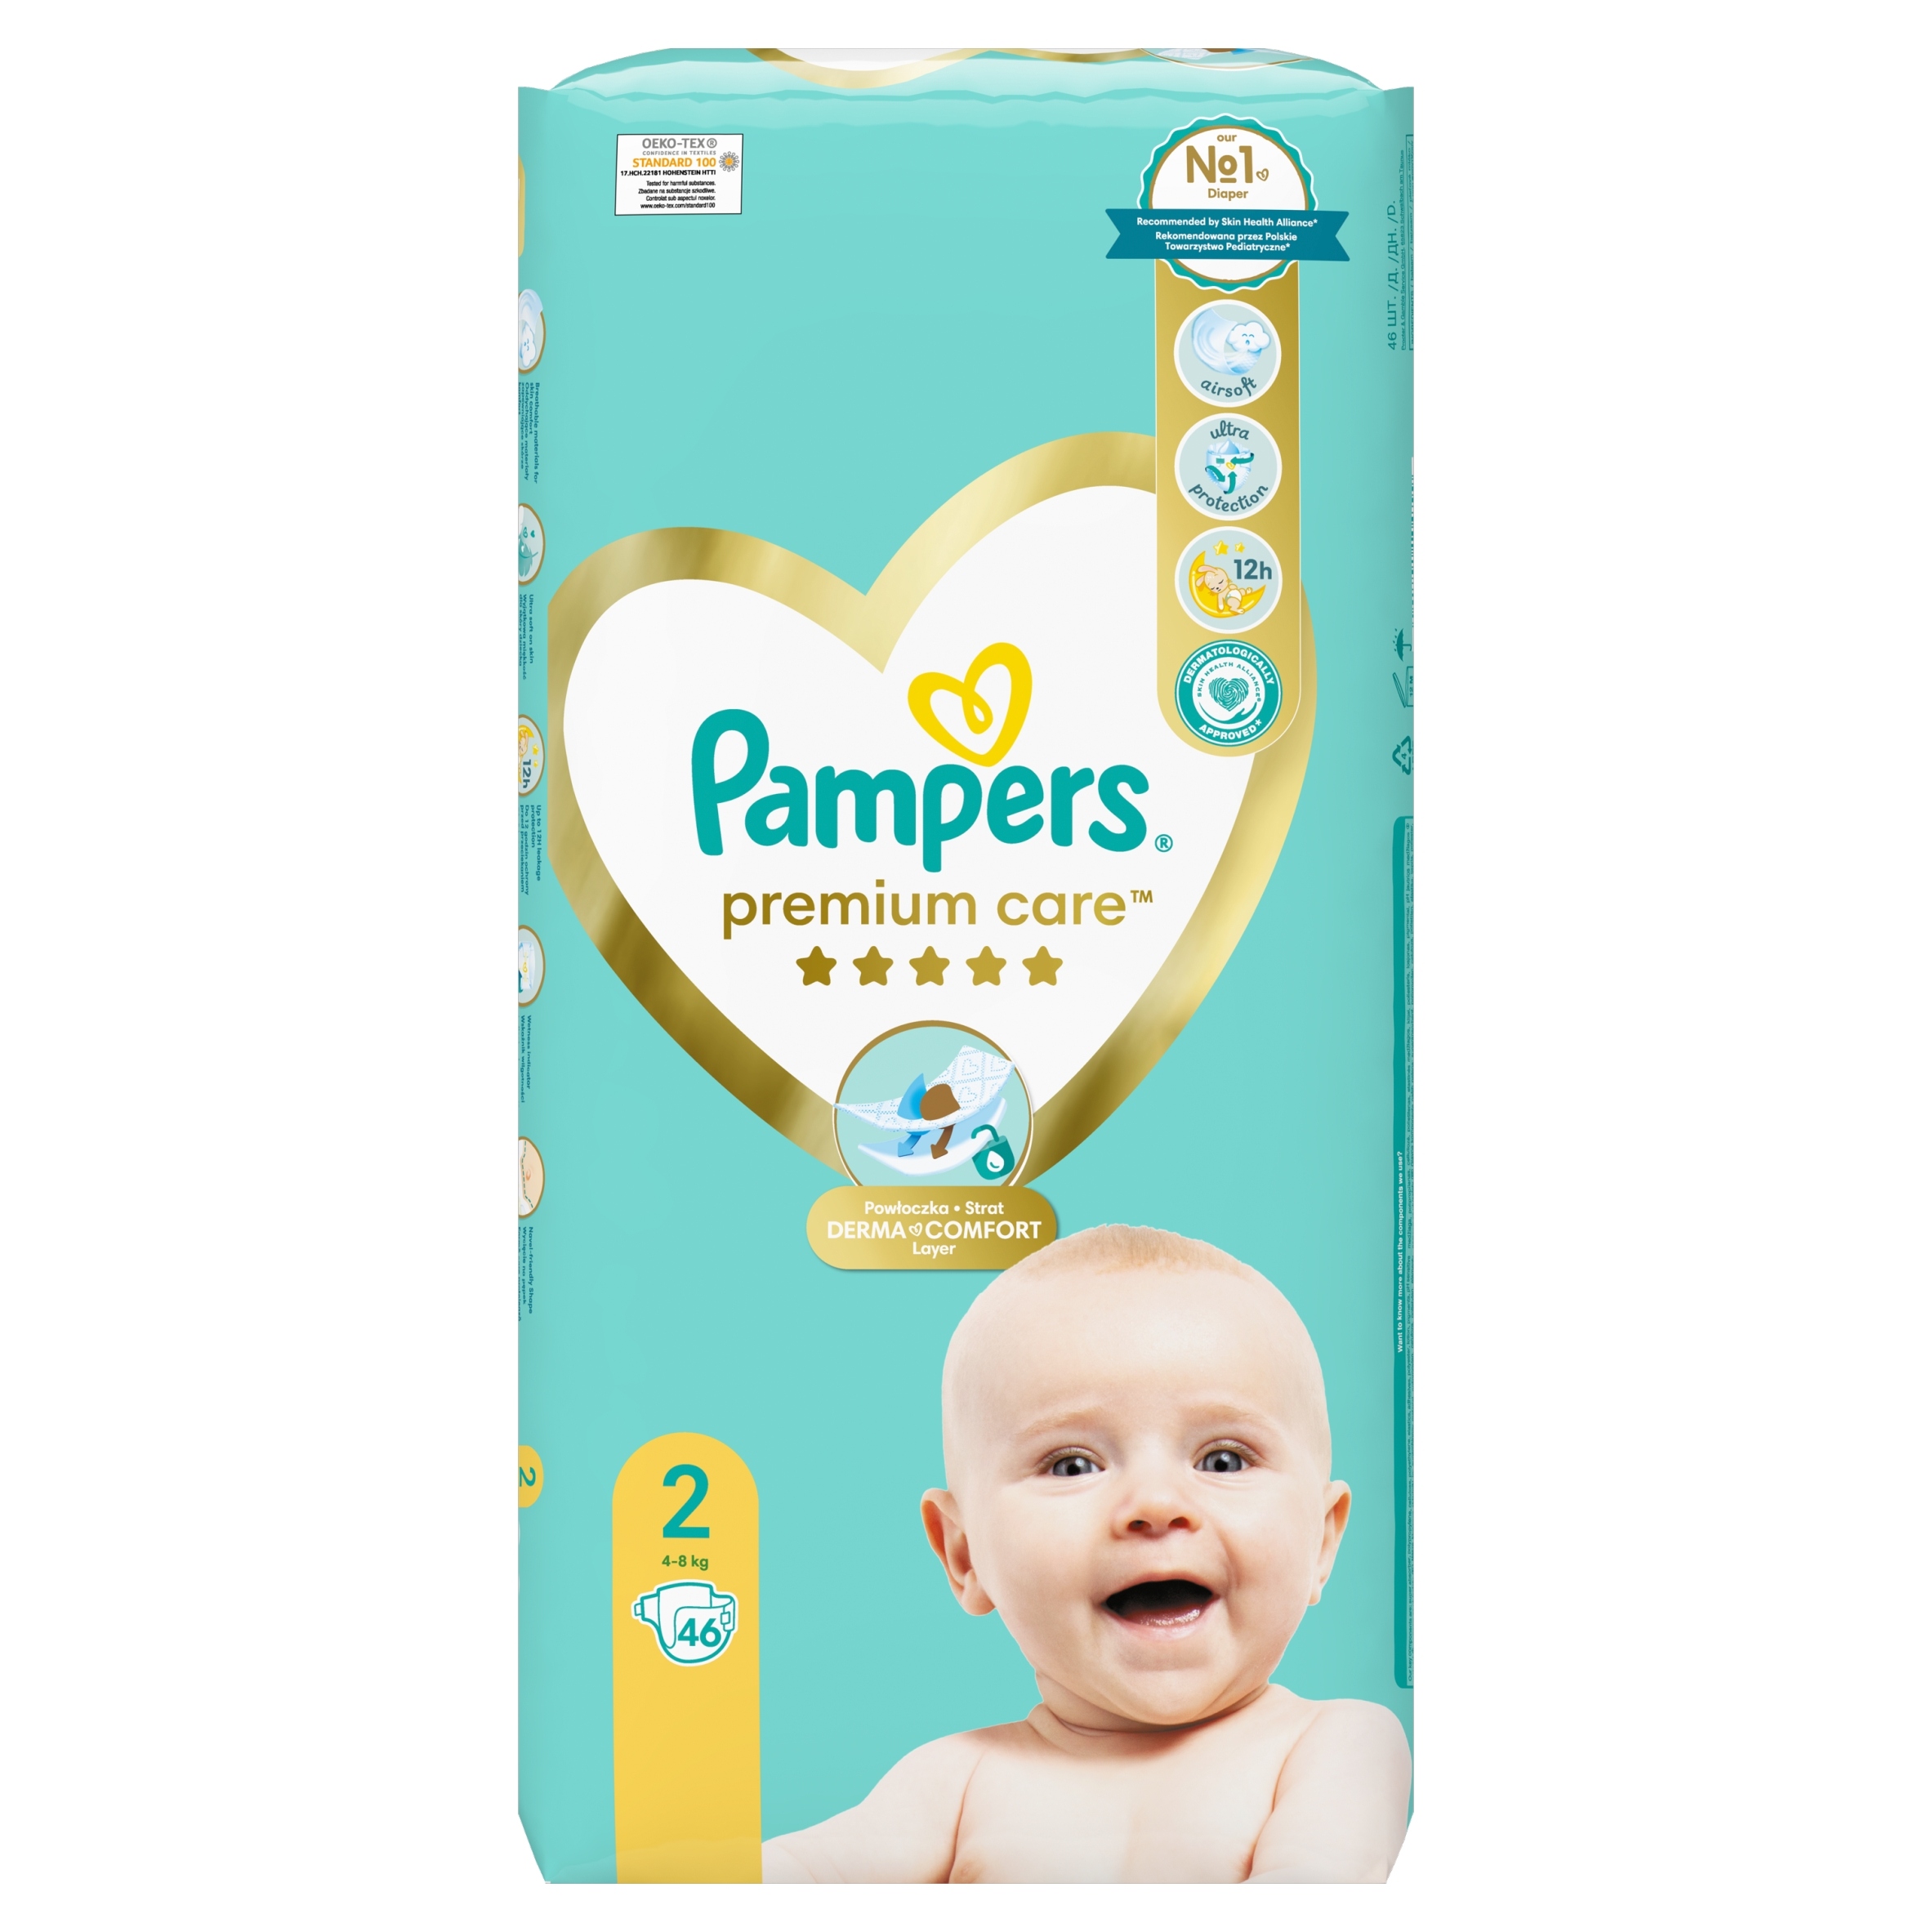 pampers nappies 5 tesco